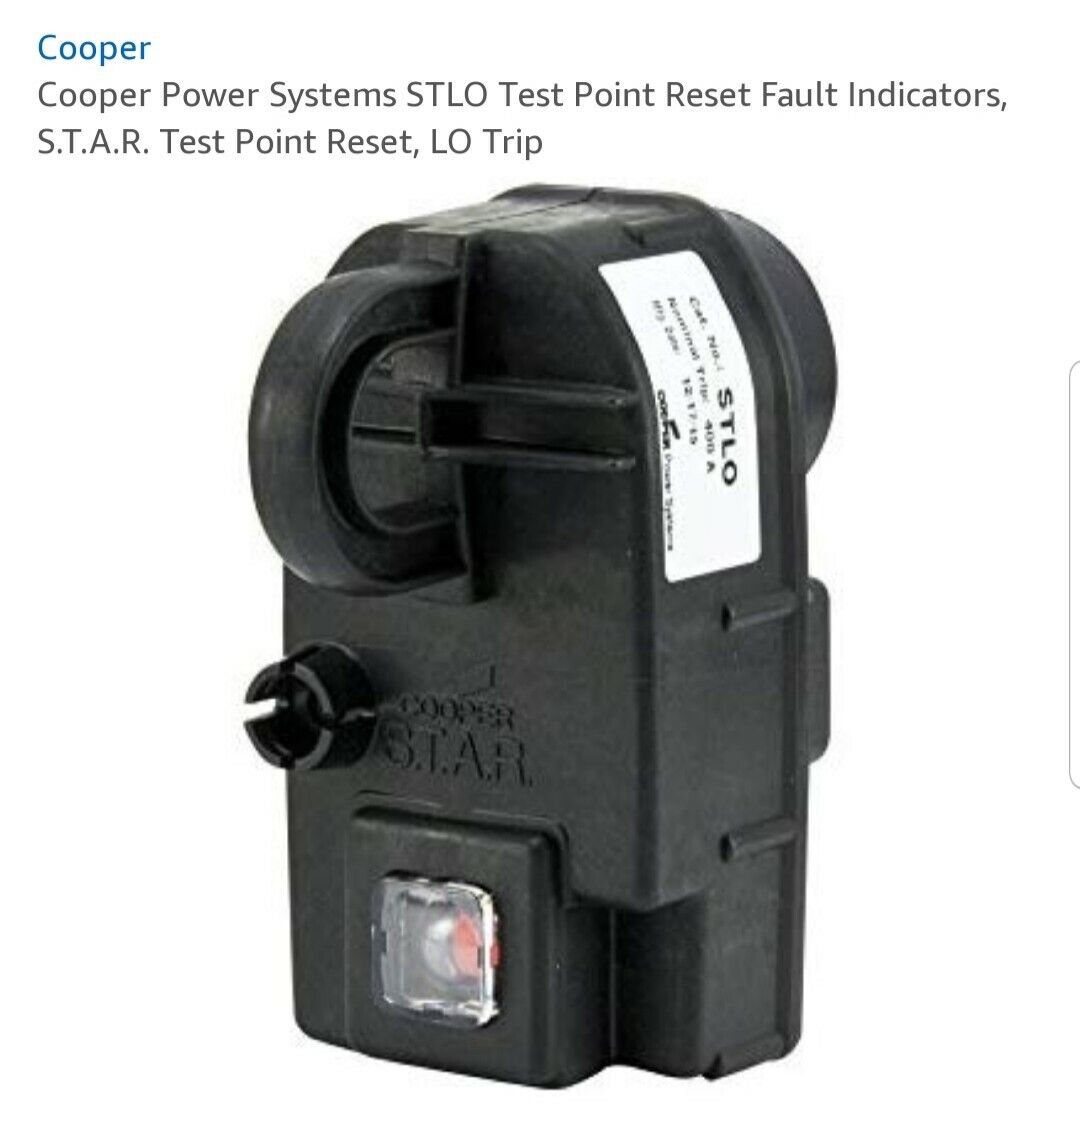 Cooper Power Systems STLO Test Point Reset Fault Indicators, S.T.A.R. Test Point